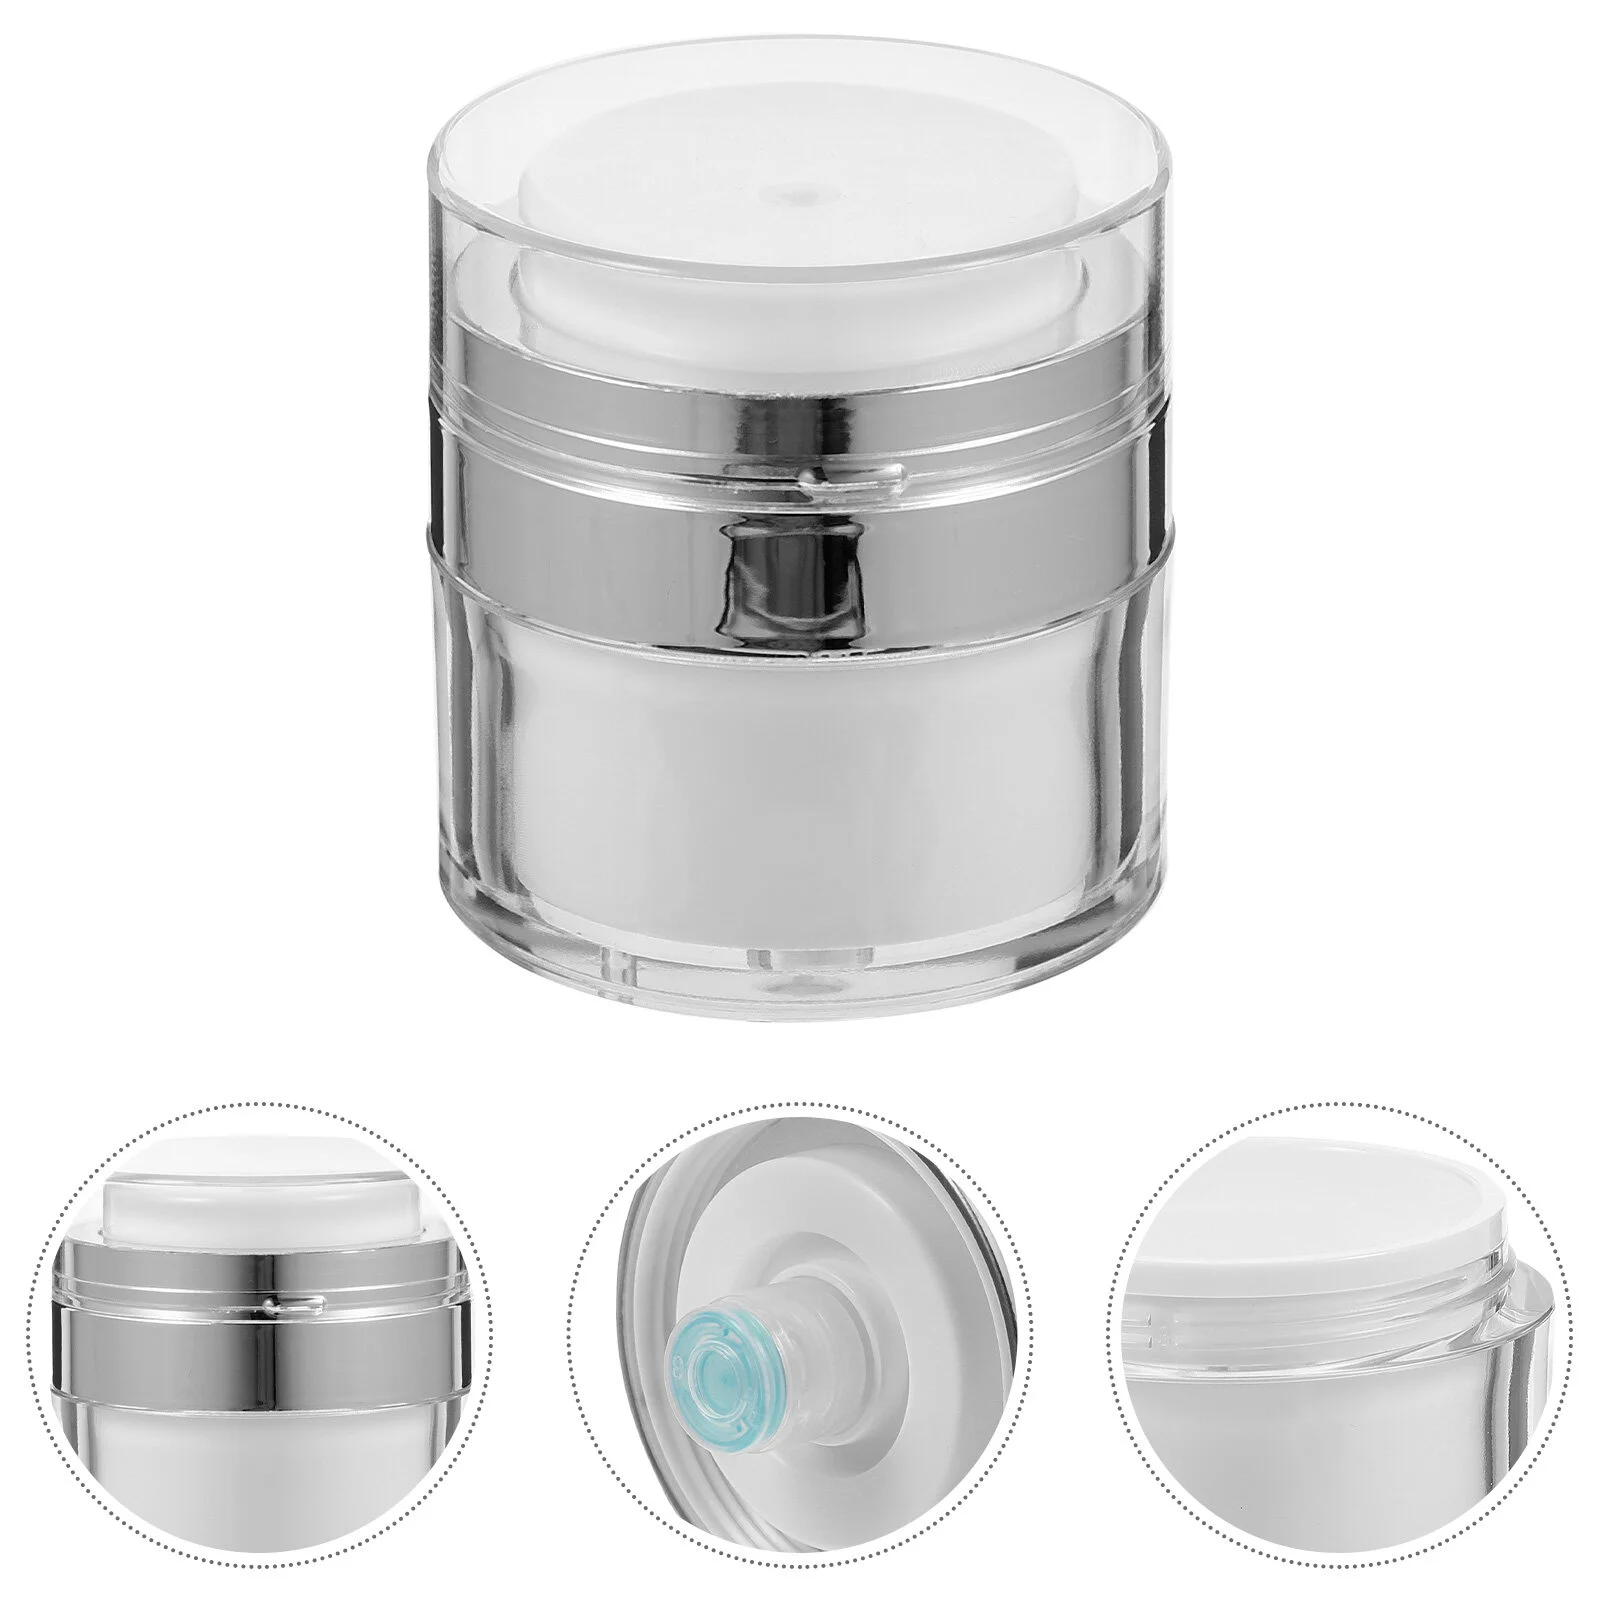 

3 Pcs Press Cream Jar Skincare Travel Containers Airless Sub Jars Box Push Bottle Pressing Type The Pet Lotion Pump Package